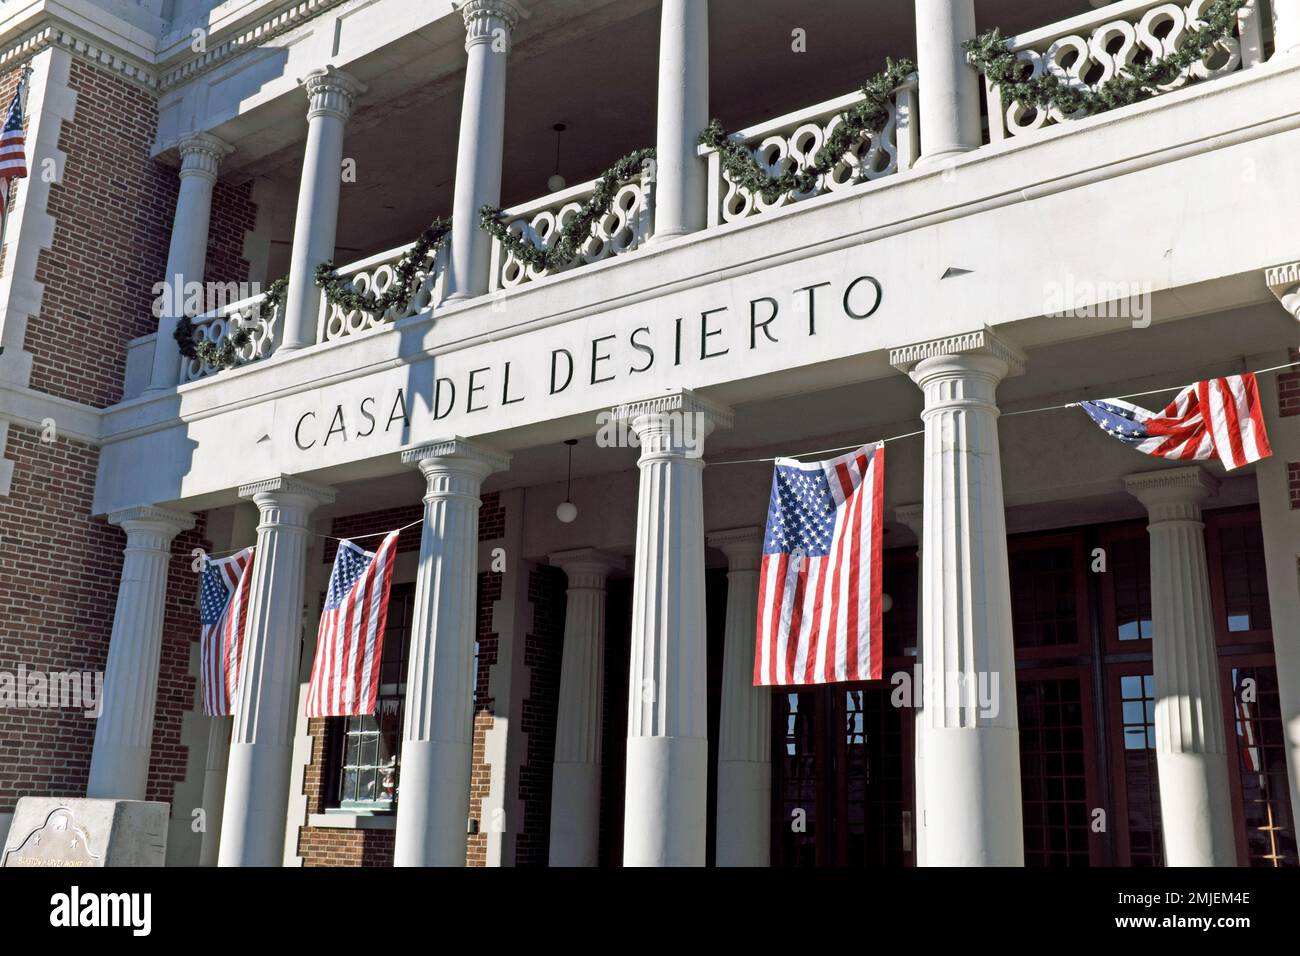 Opened in 1911, the Casa del Desierto was a Harvey House hotel and Santa Fe Railroad depot located in Barstow, California in the Mojave desert. Stock Photo